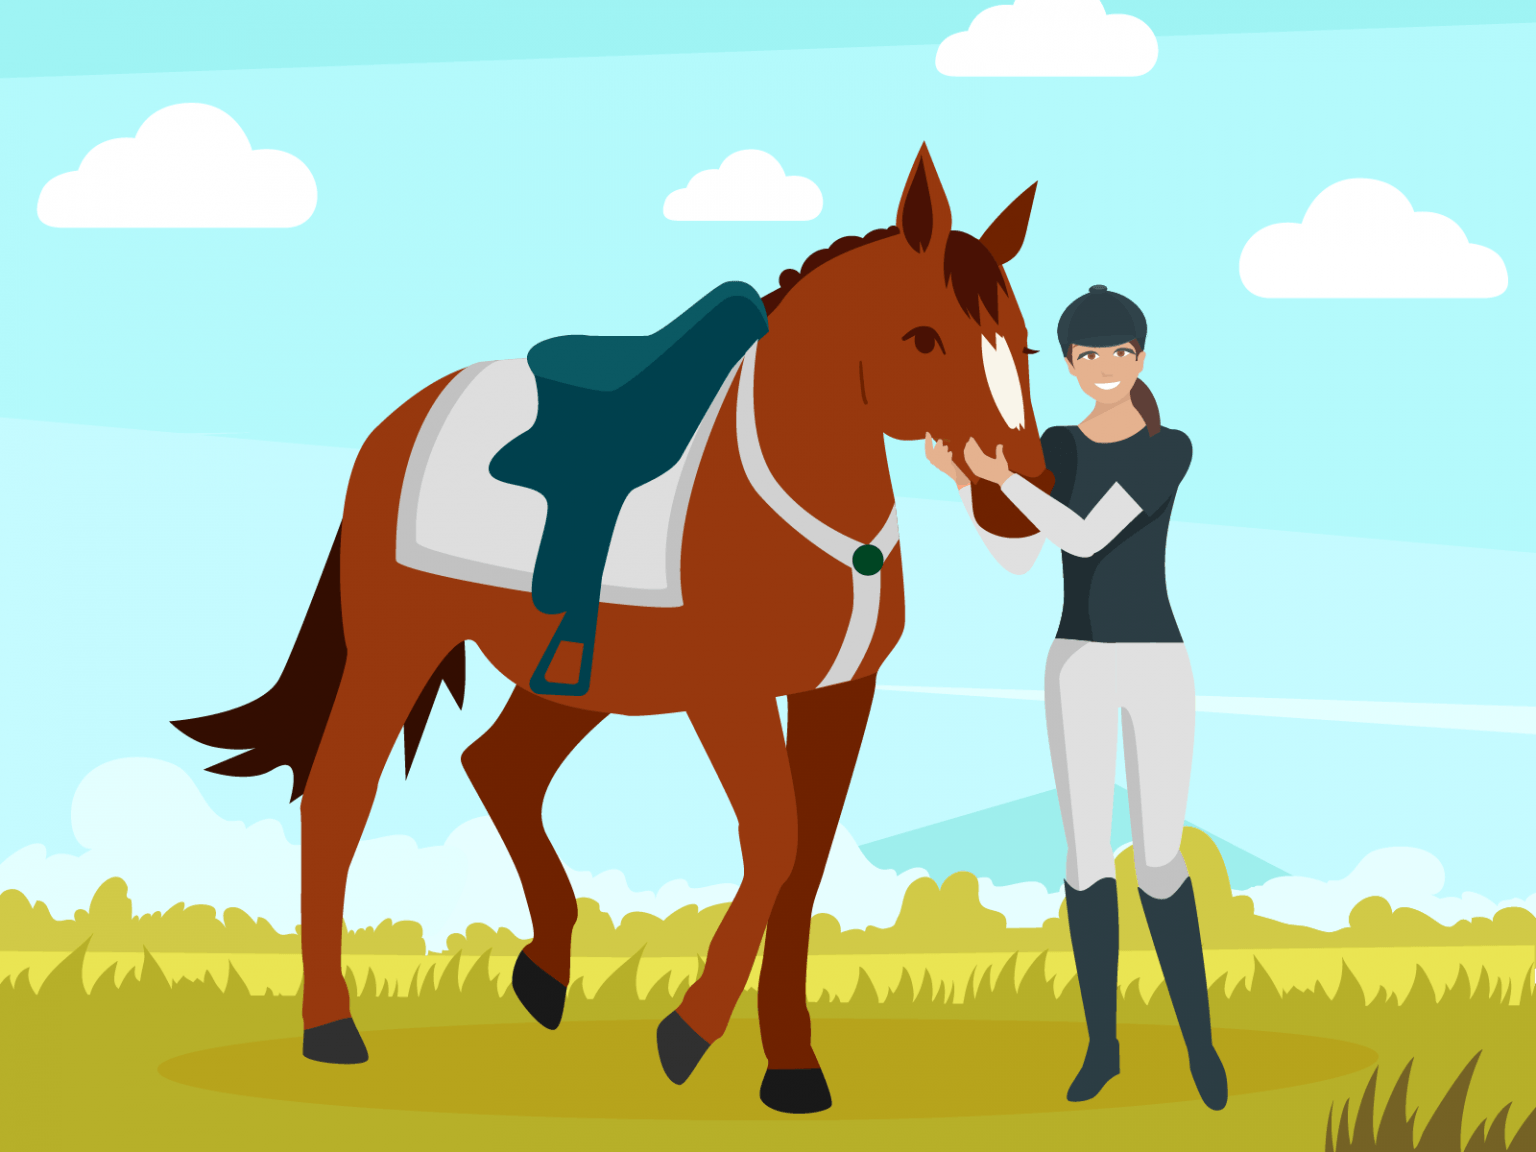 10 Things You Never Knew About Horse Jockeys - Top 10 Jockey Facts